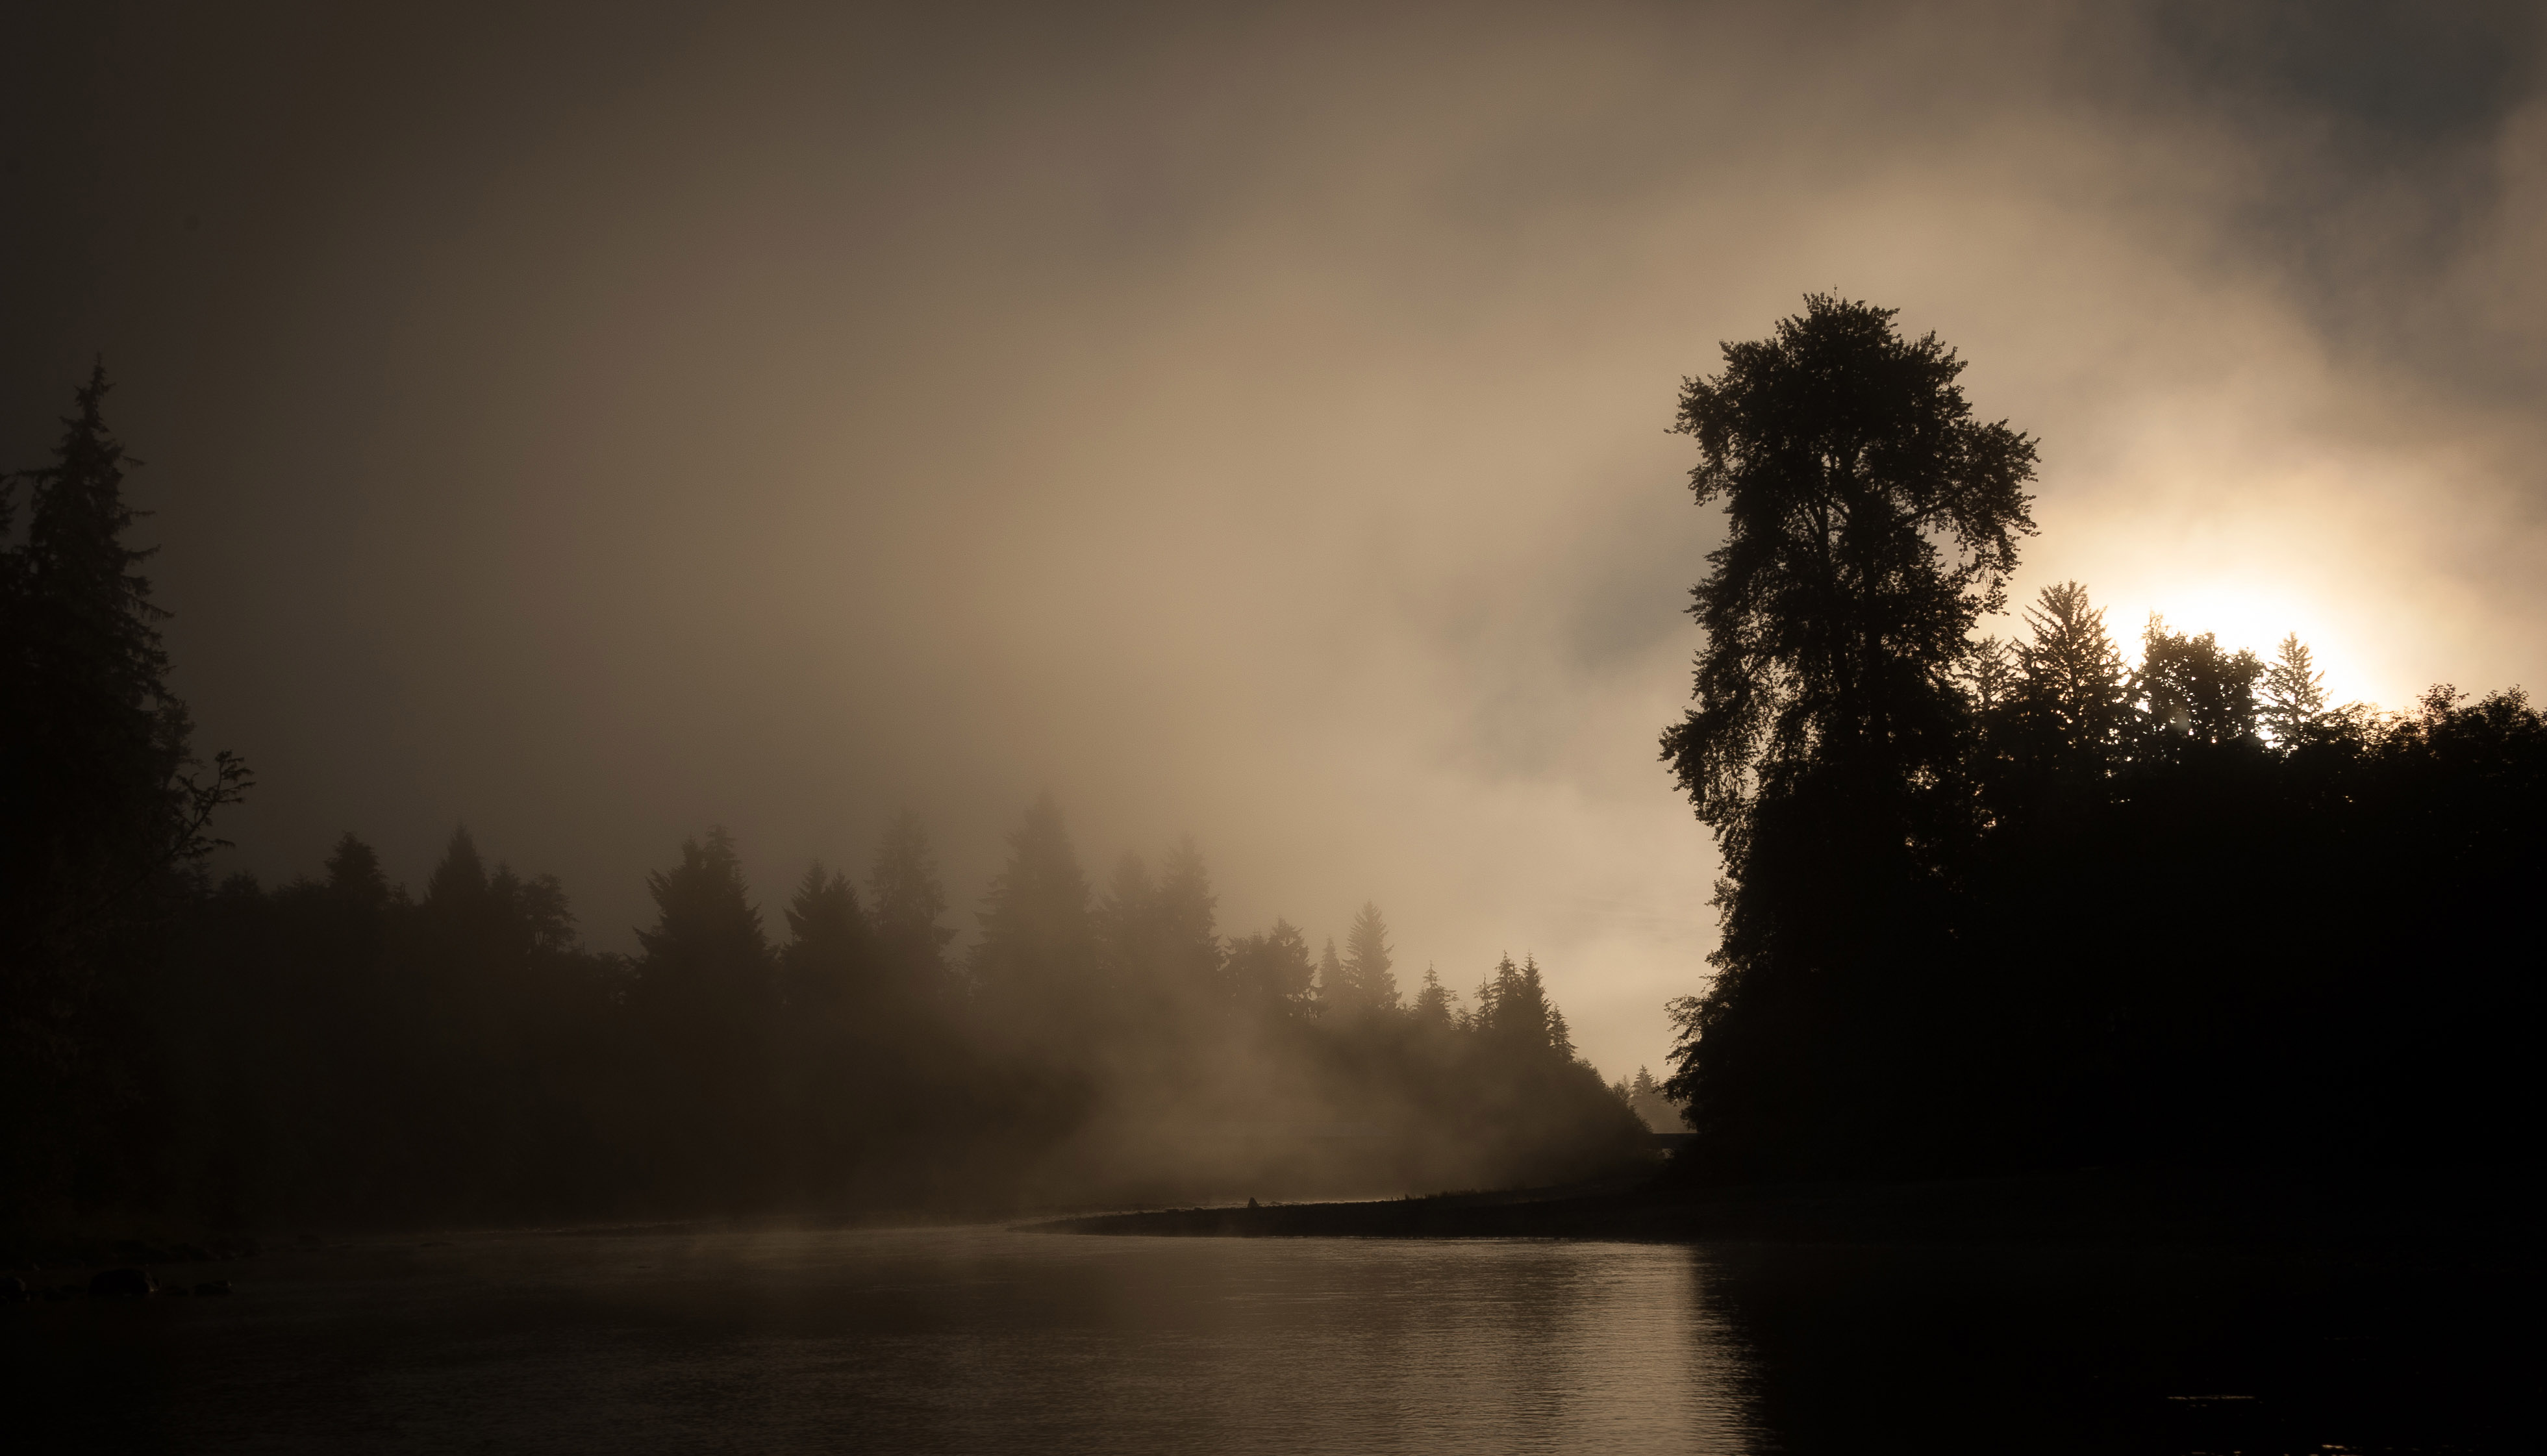 Early morning fog on the river in wild western Washington